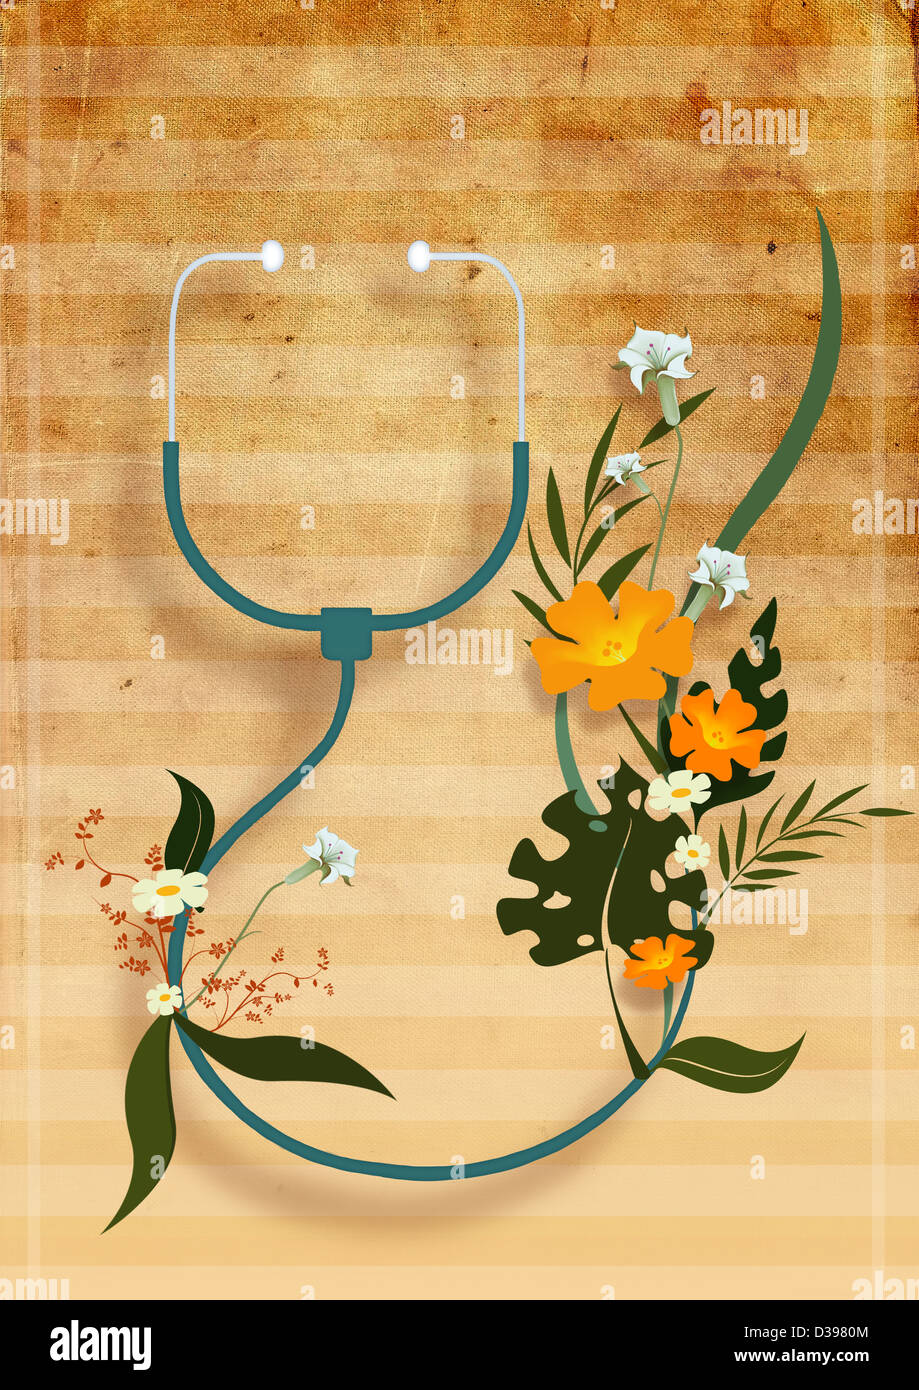 Herbal stethoscope with flowers over colored background depicting natural medicine Stock Photo